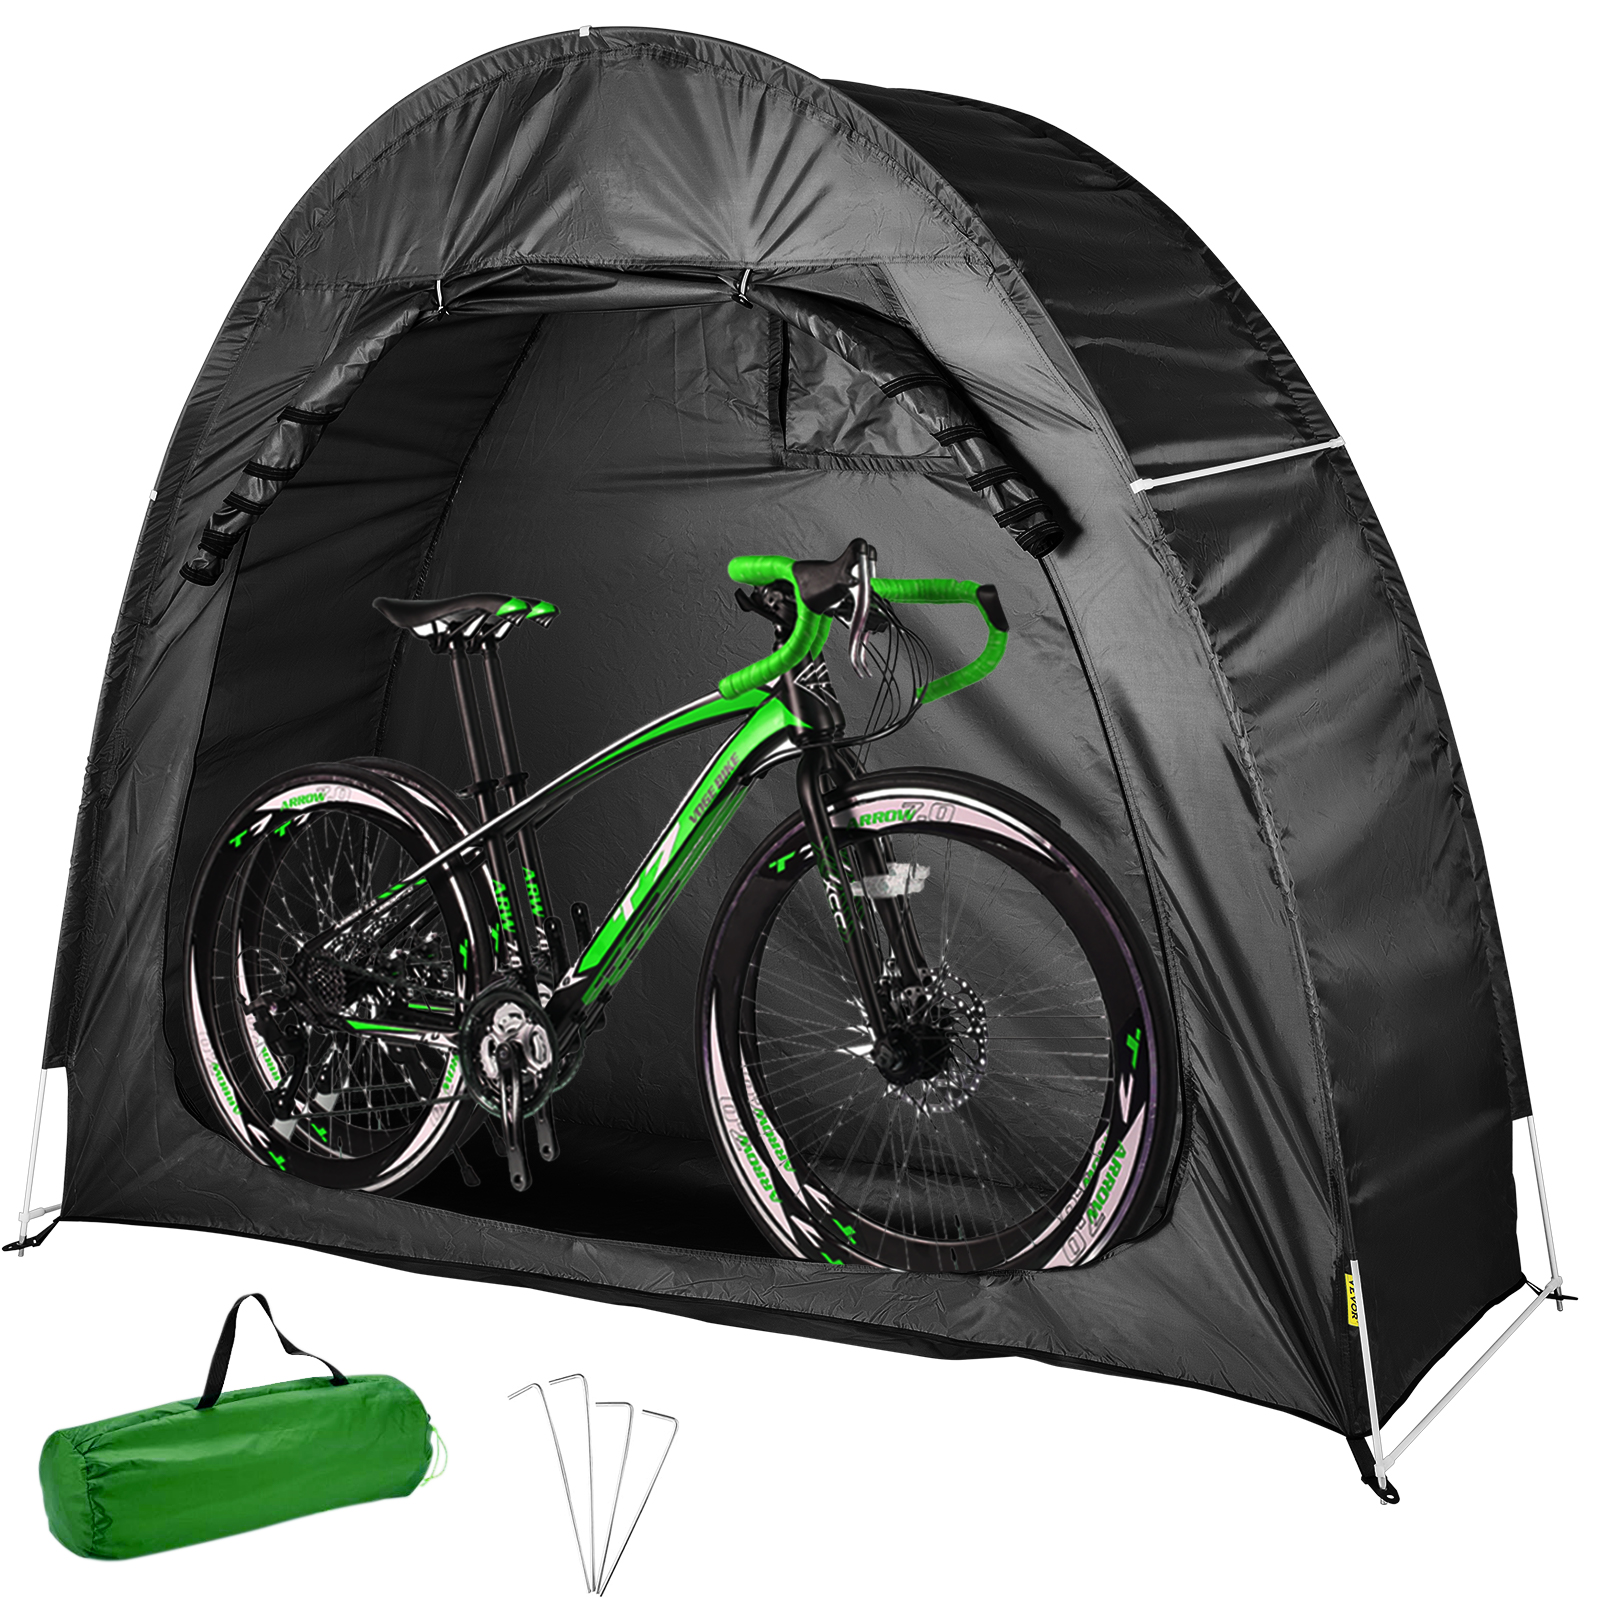 Details about   Bike Tent Storage Shed Bicycle Storage Shed Window Design Camping Accessories 